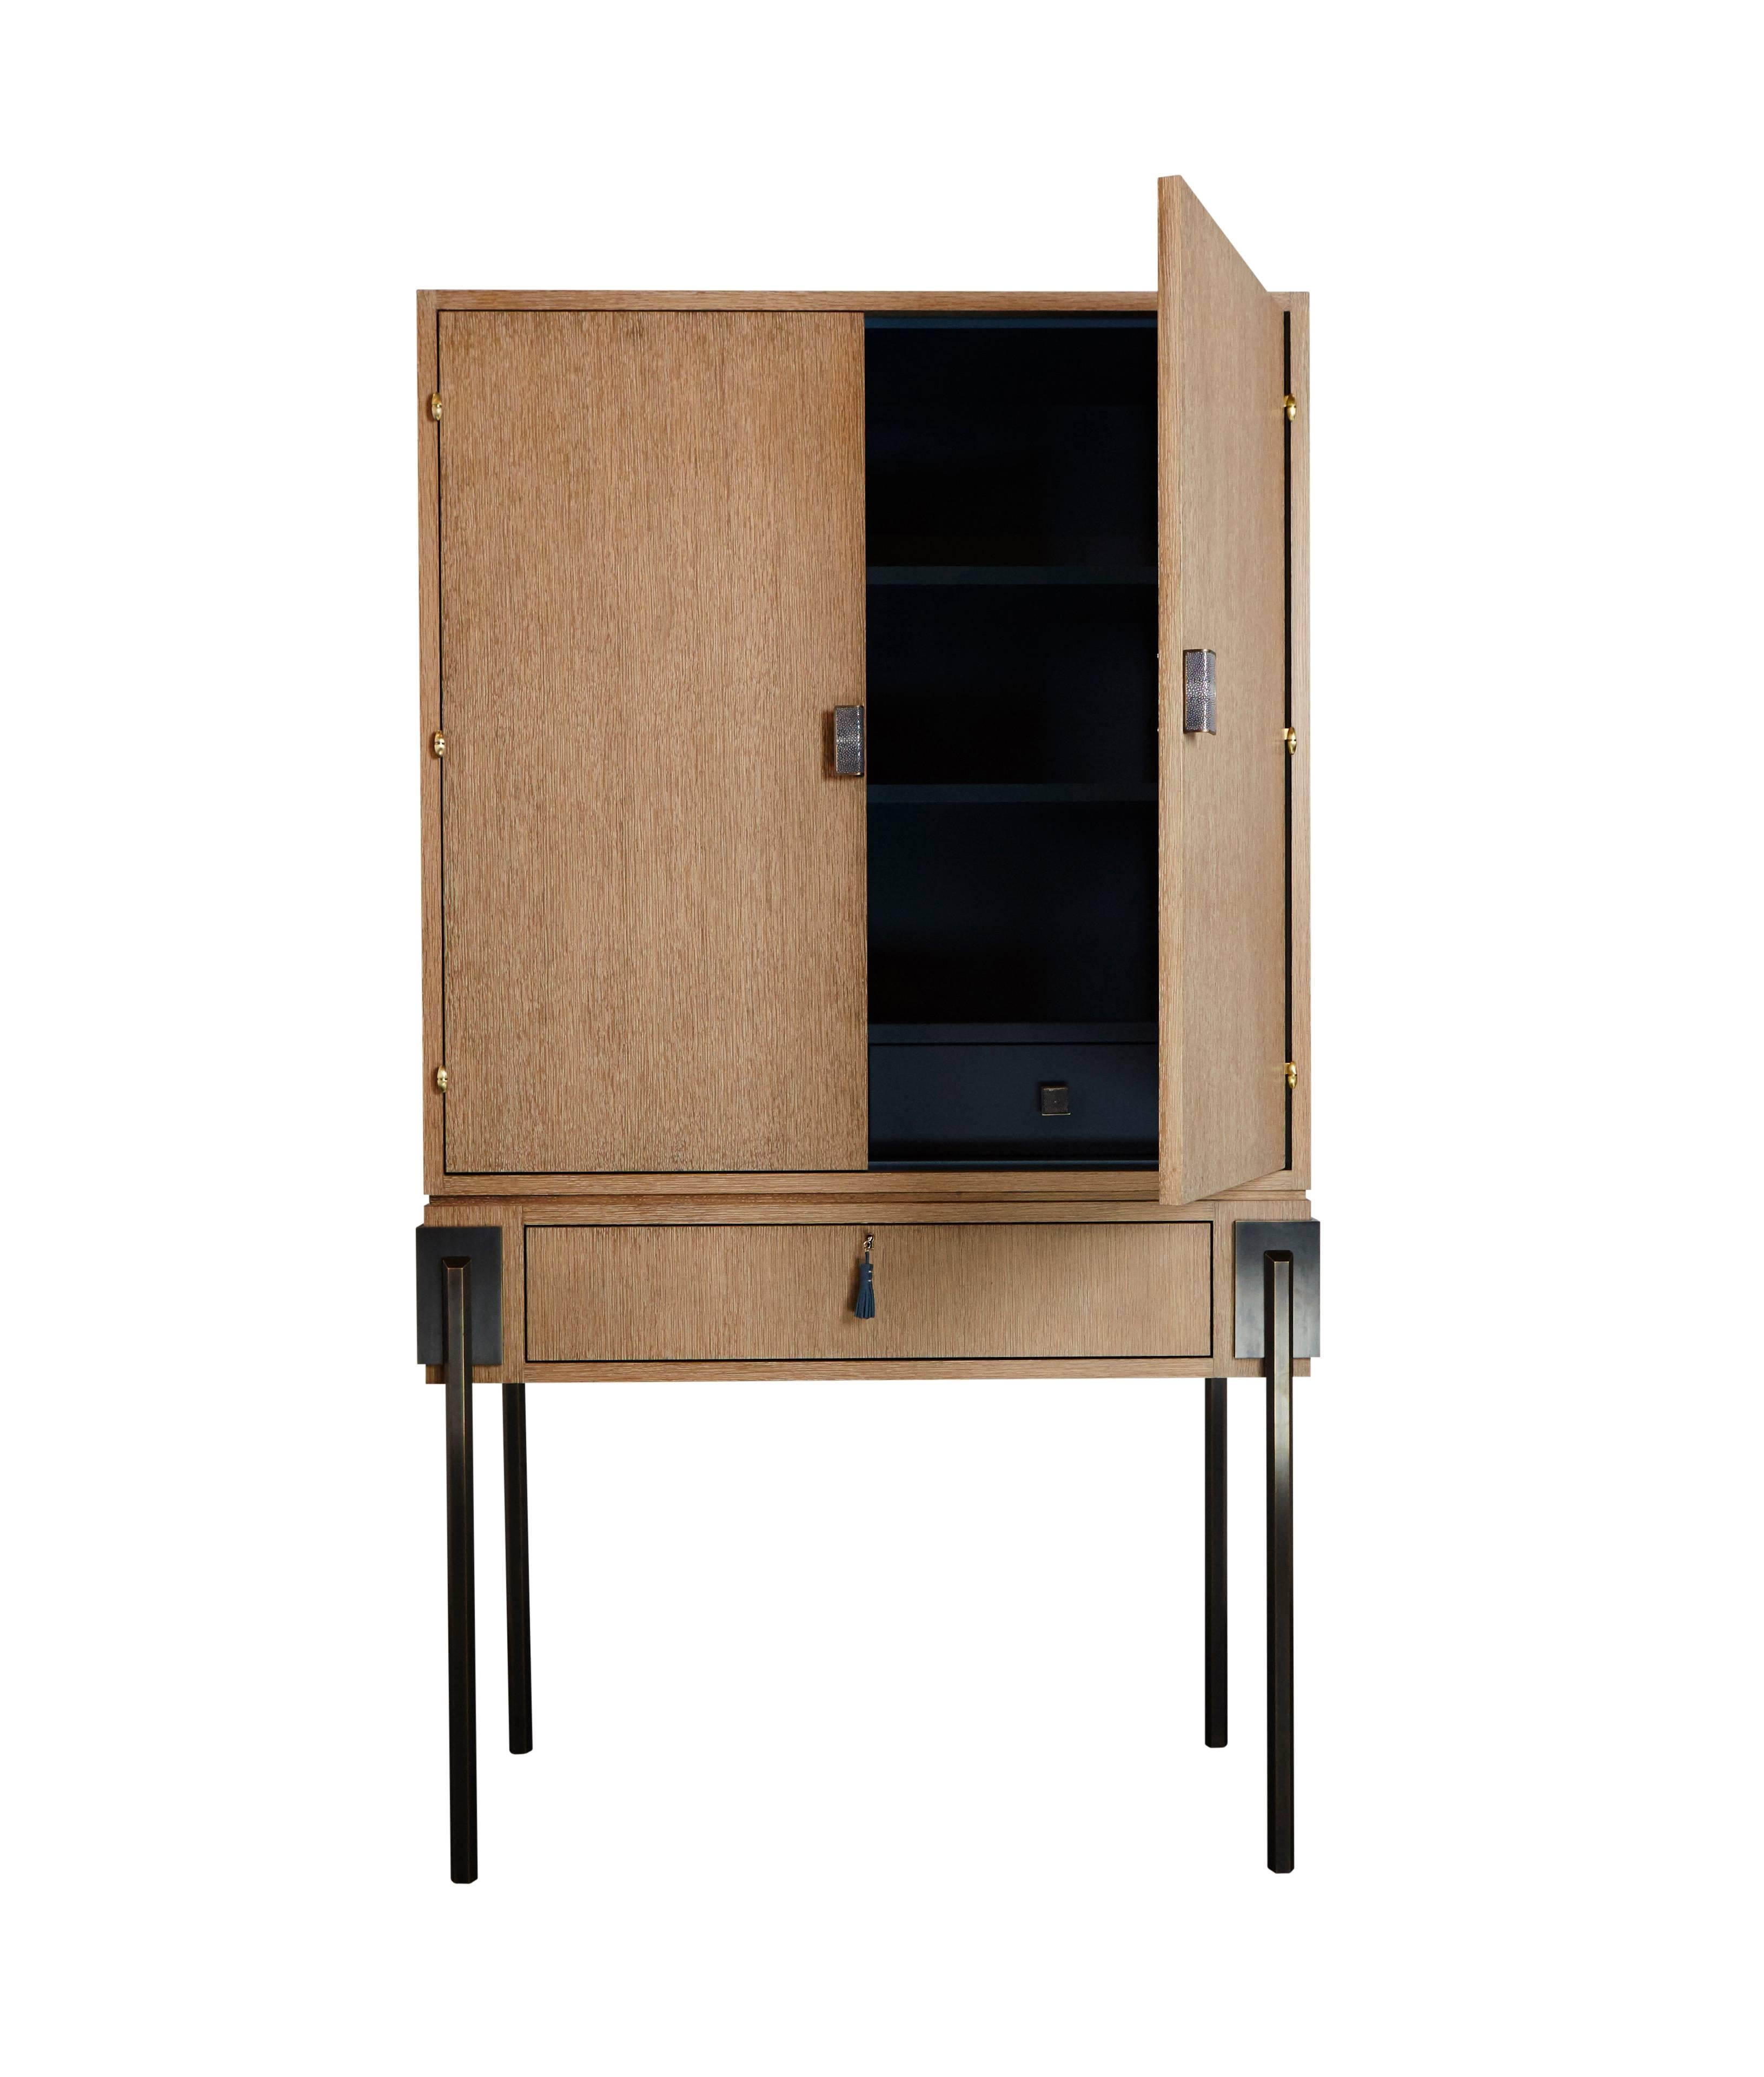 The HEX Armoire is a cerused white oak cabinet that blends the purity of wood with a surprising blue leather interior. The piece is accented by eloquent details like monolithic bronze legs, blue leather tassels, and original sculpted CZA ‘Waterfall’